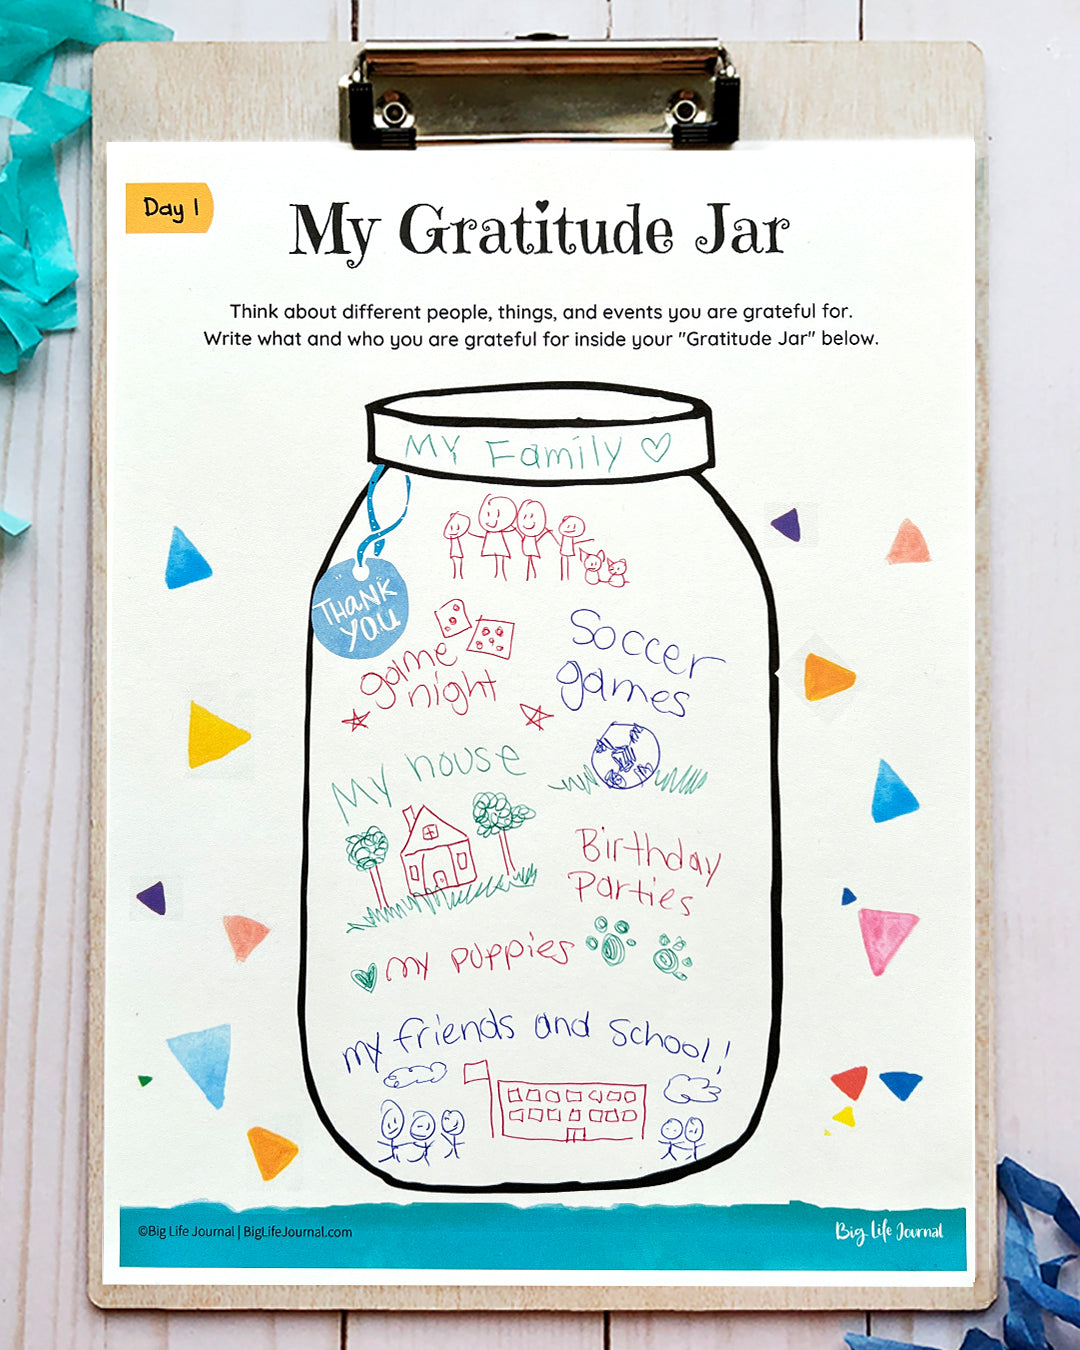 Daily Edition (ages 5-11) + 2nd Edition (ages 7-10) Bundle – Big Life  Journal